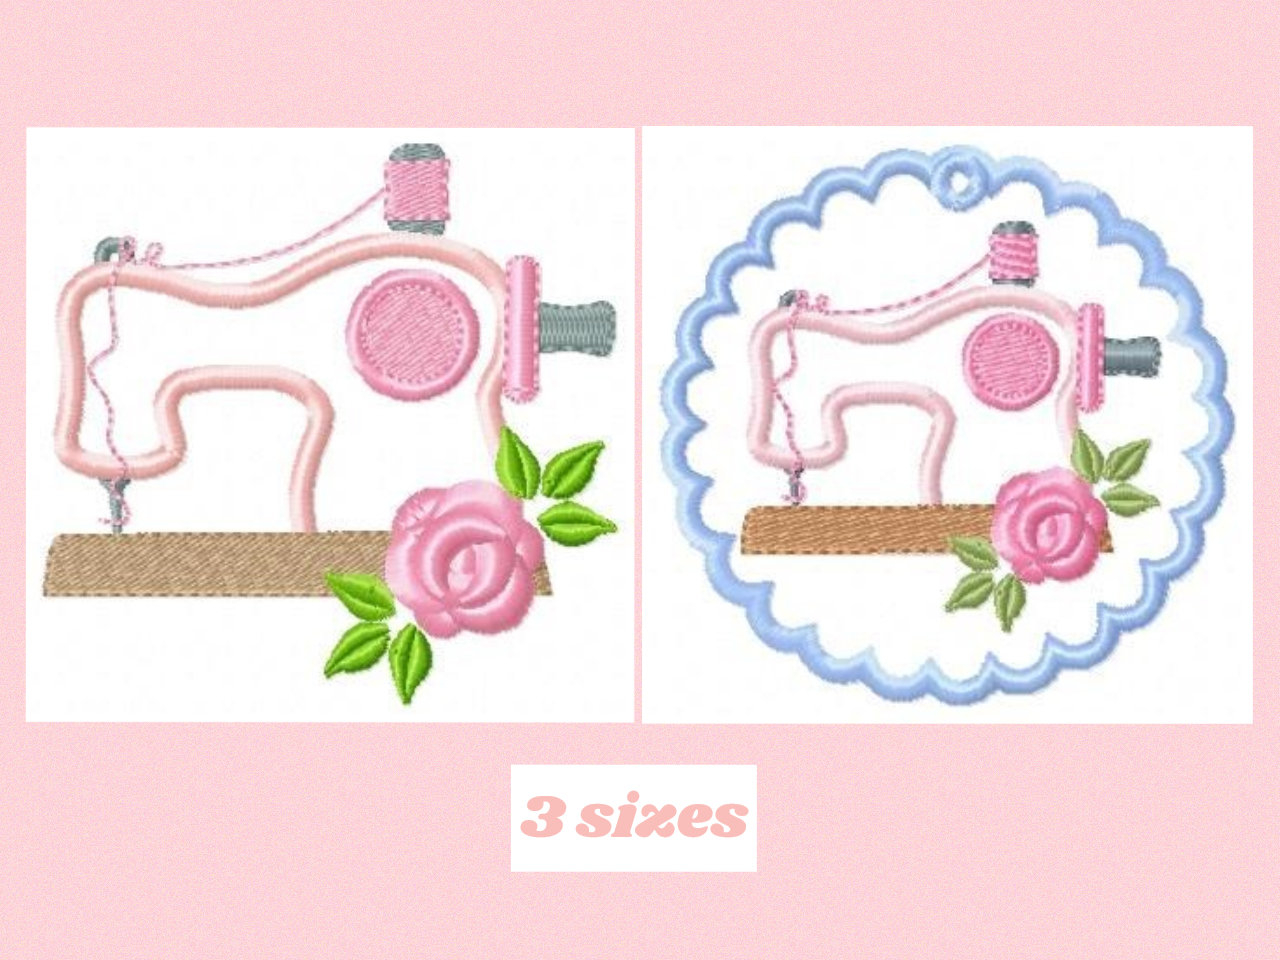 Sewing Machine Embroidery Patterns Sewing Embroidery Designs Singer Embroidery Design Sewing Machine Embroidery Pattern Frame Embroidery File Sewing Machine Applique Design